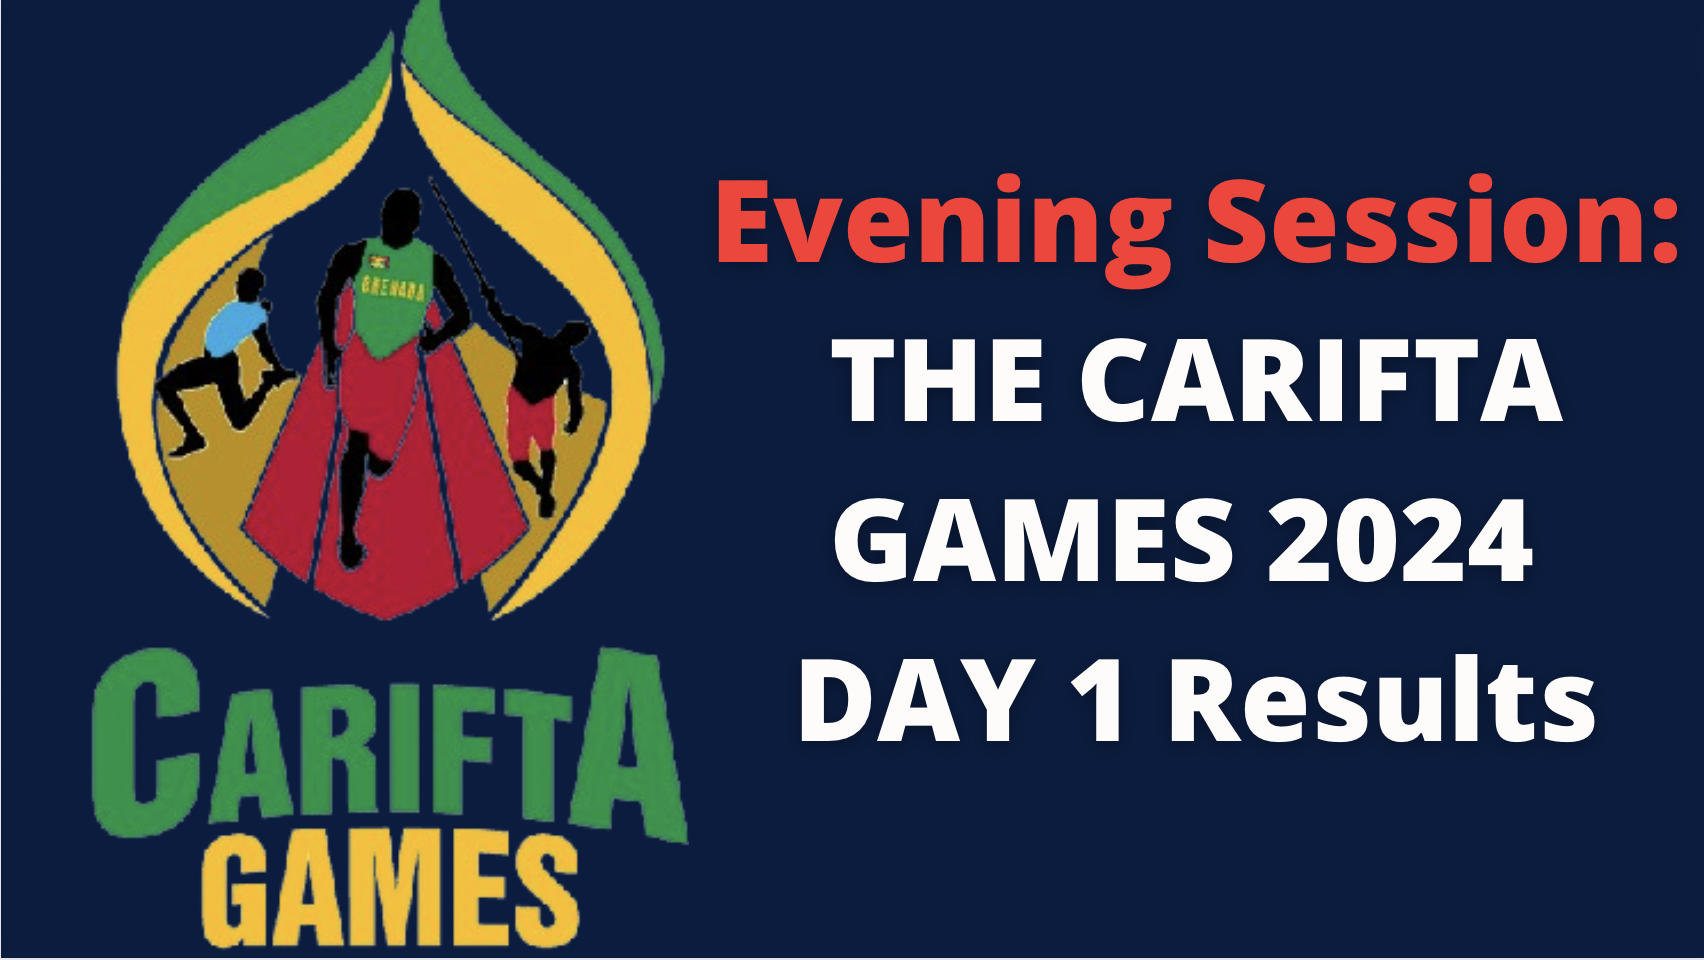 Carifta Games 2024 Results: Day 1 Finals Only Afternoon Session